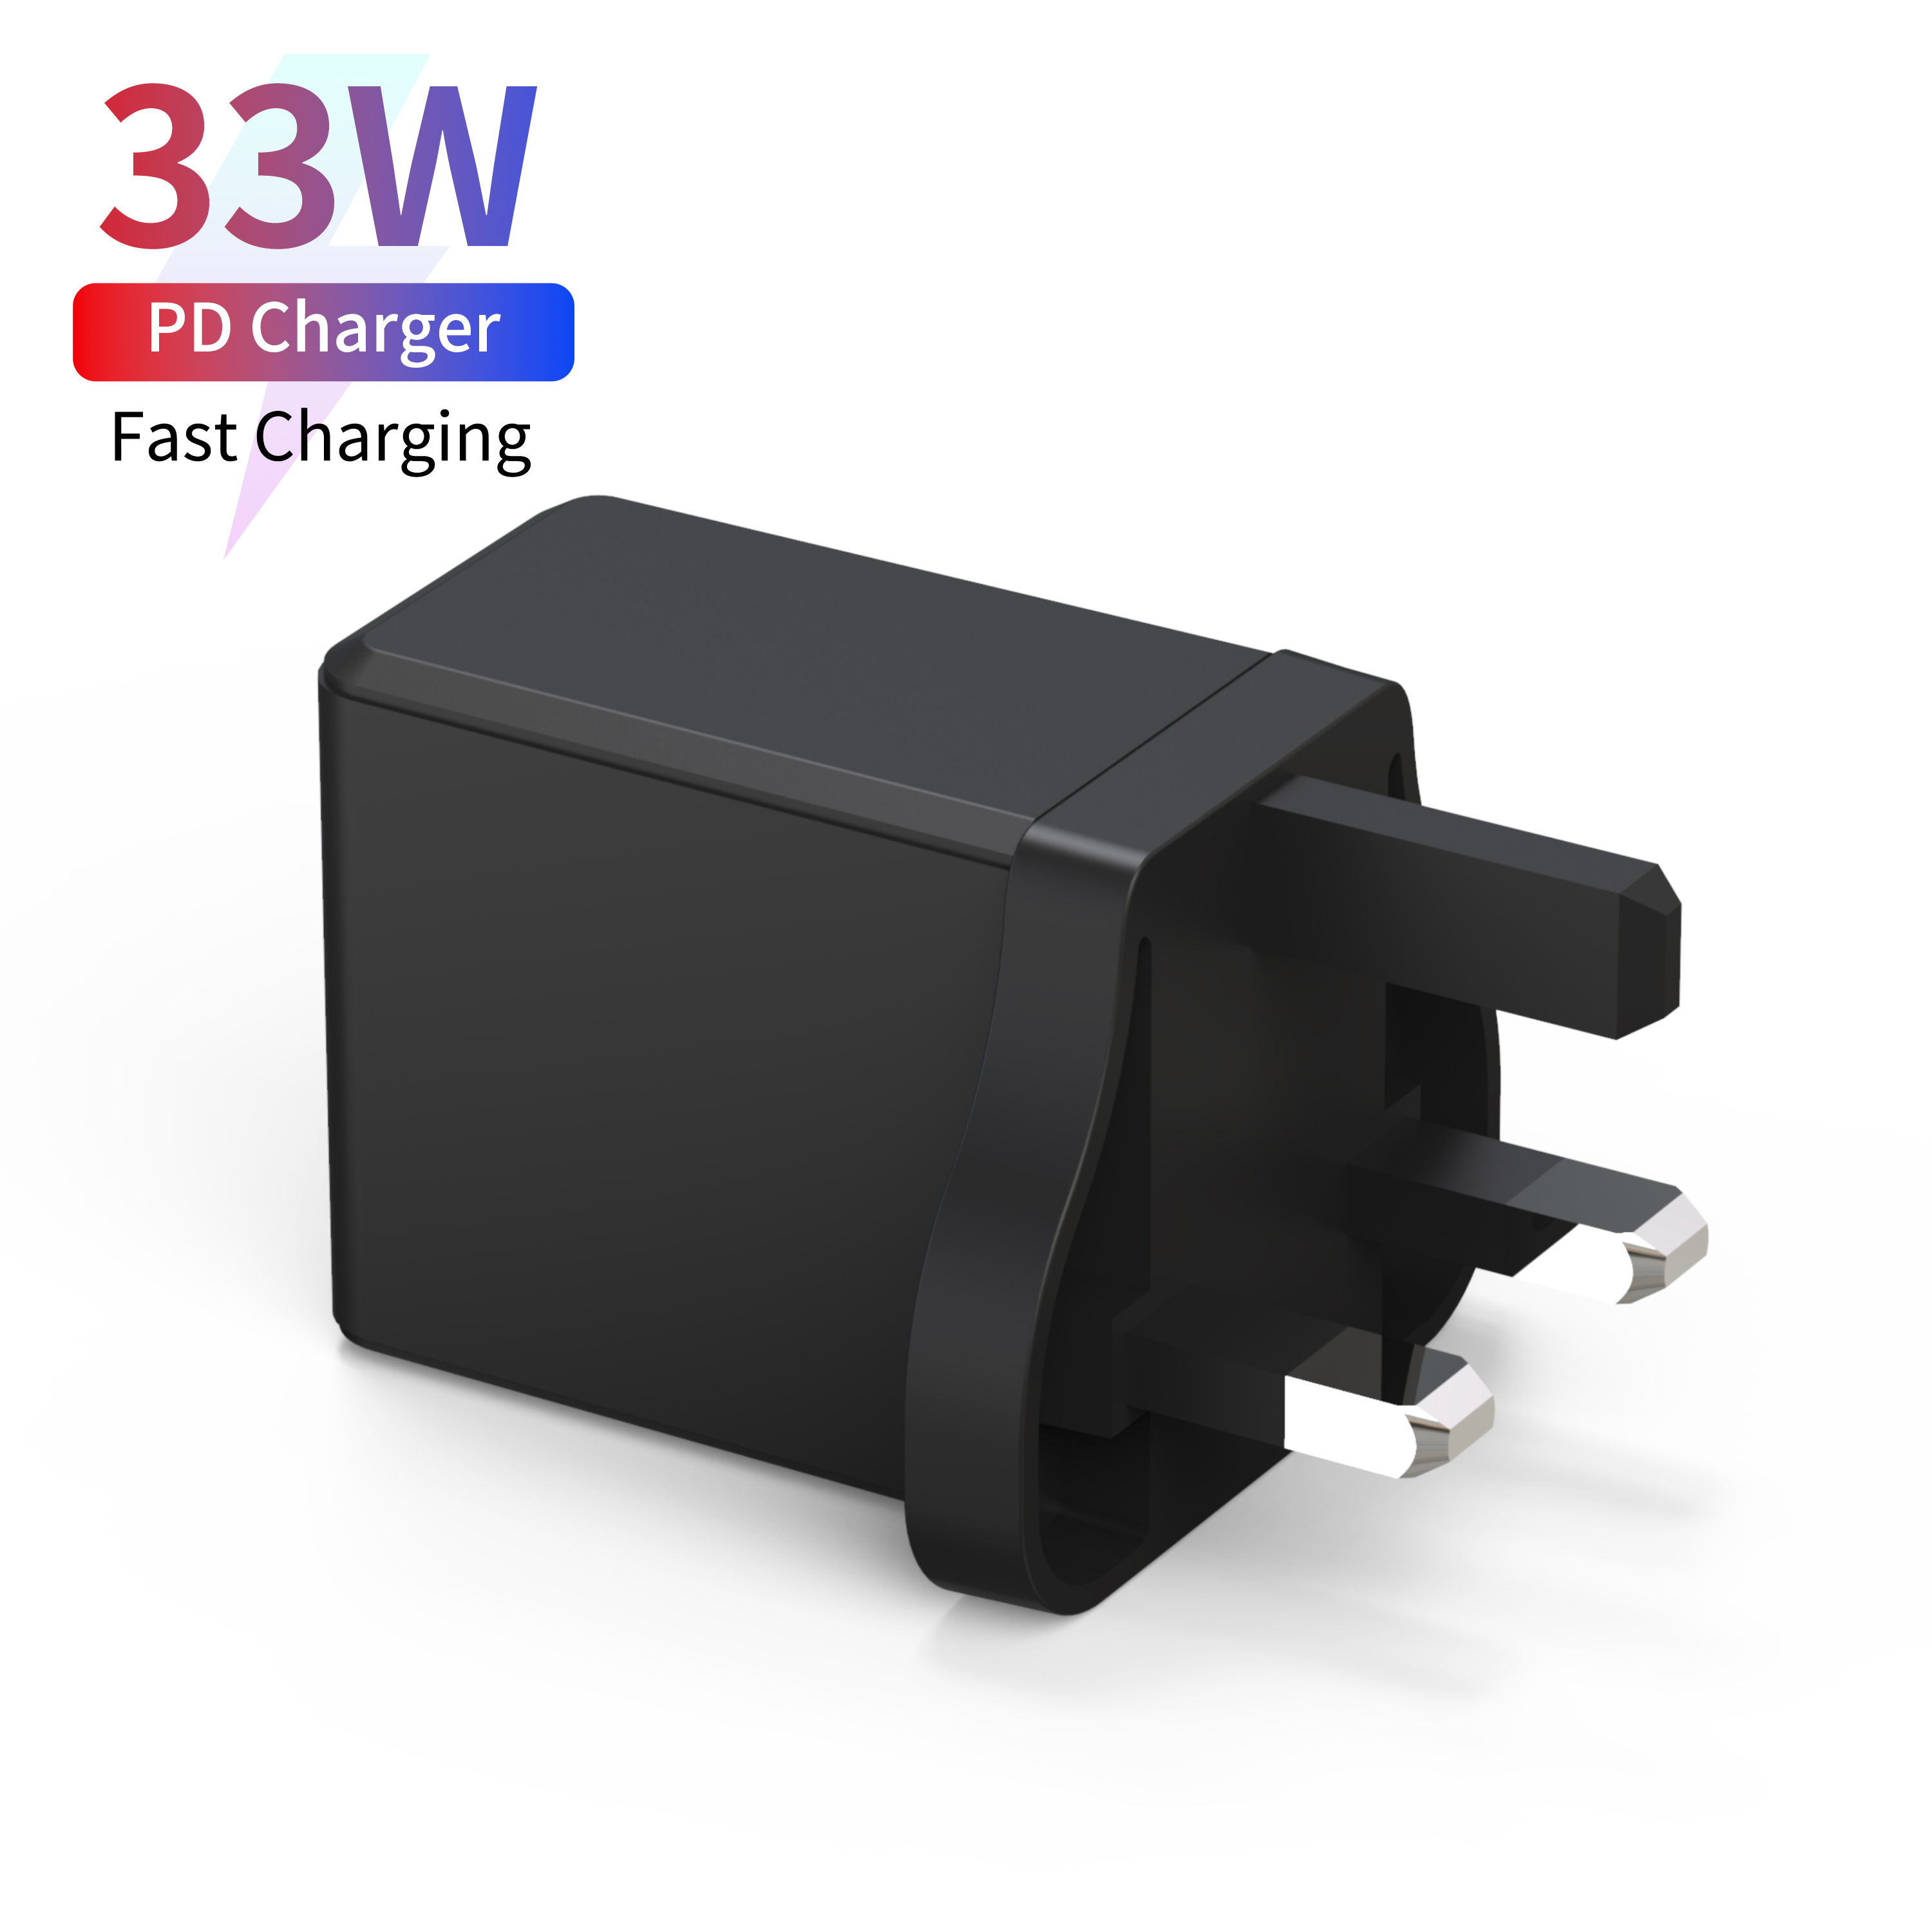 PD 20w Charger-A2008-002